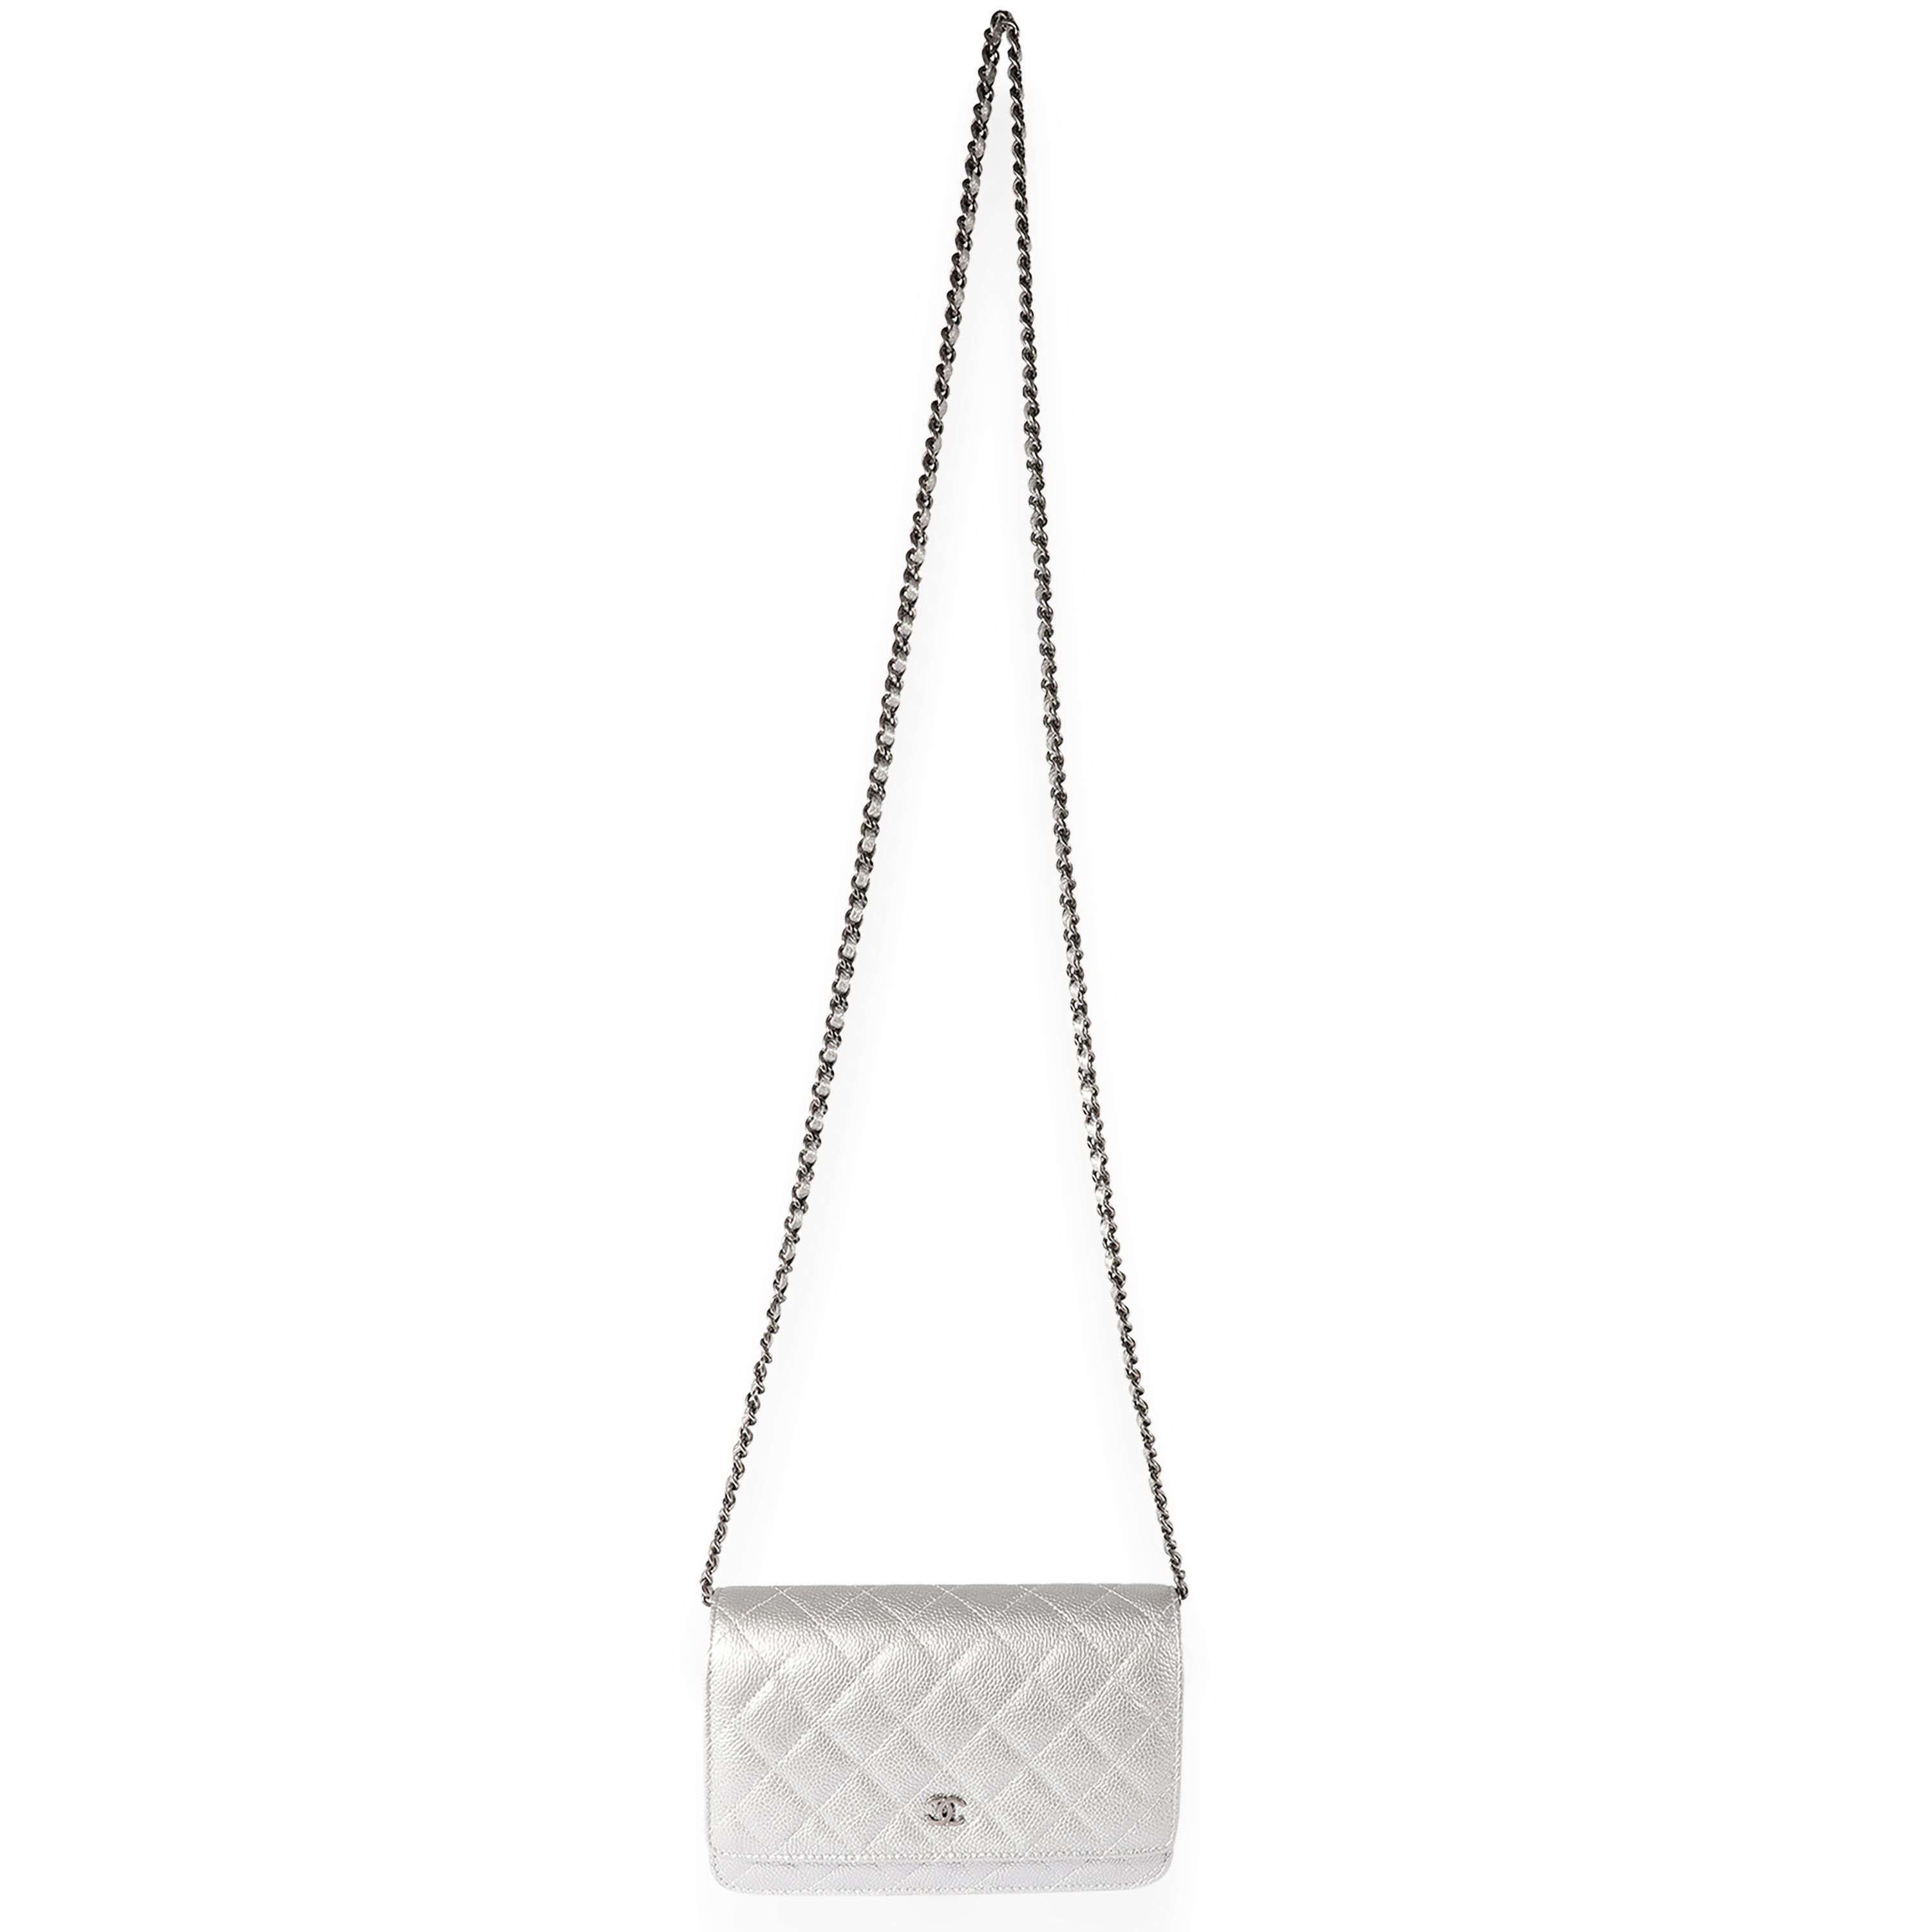 Listing Title: Chanel Silver Quilted Caviar Wallet On Chain
SKU: 122665
Condition: Pre-owned 
Handbag Condition: Mint
Condition Comments: Mint Condition. No signs of wear. Final sale.
Brand: Chanel
Model: WOC
Origin Country: Italy
Handbag